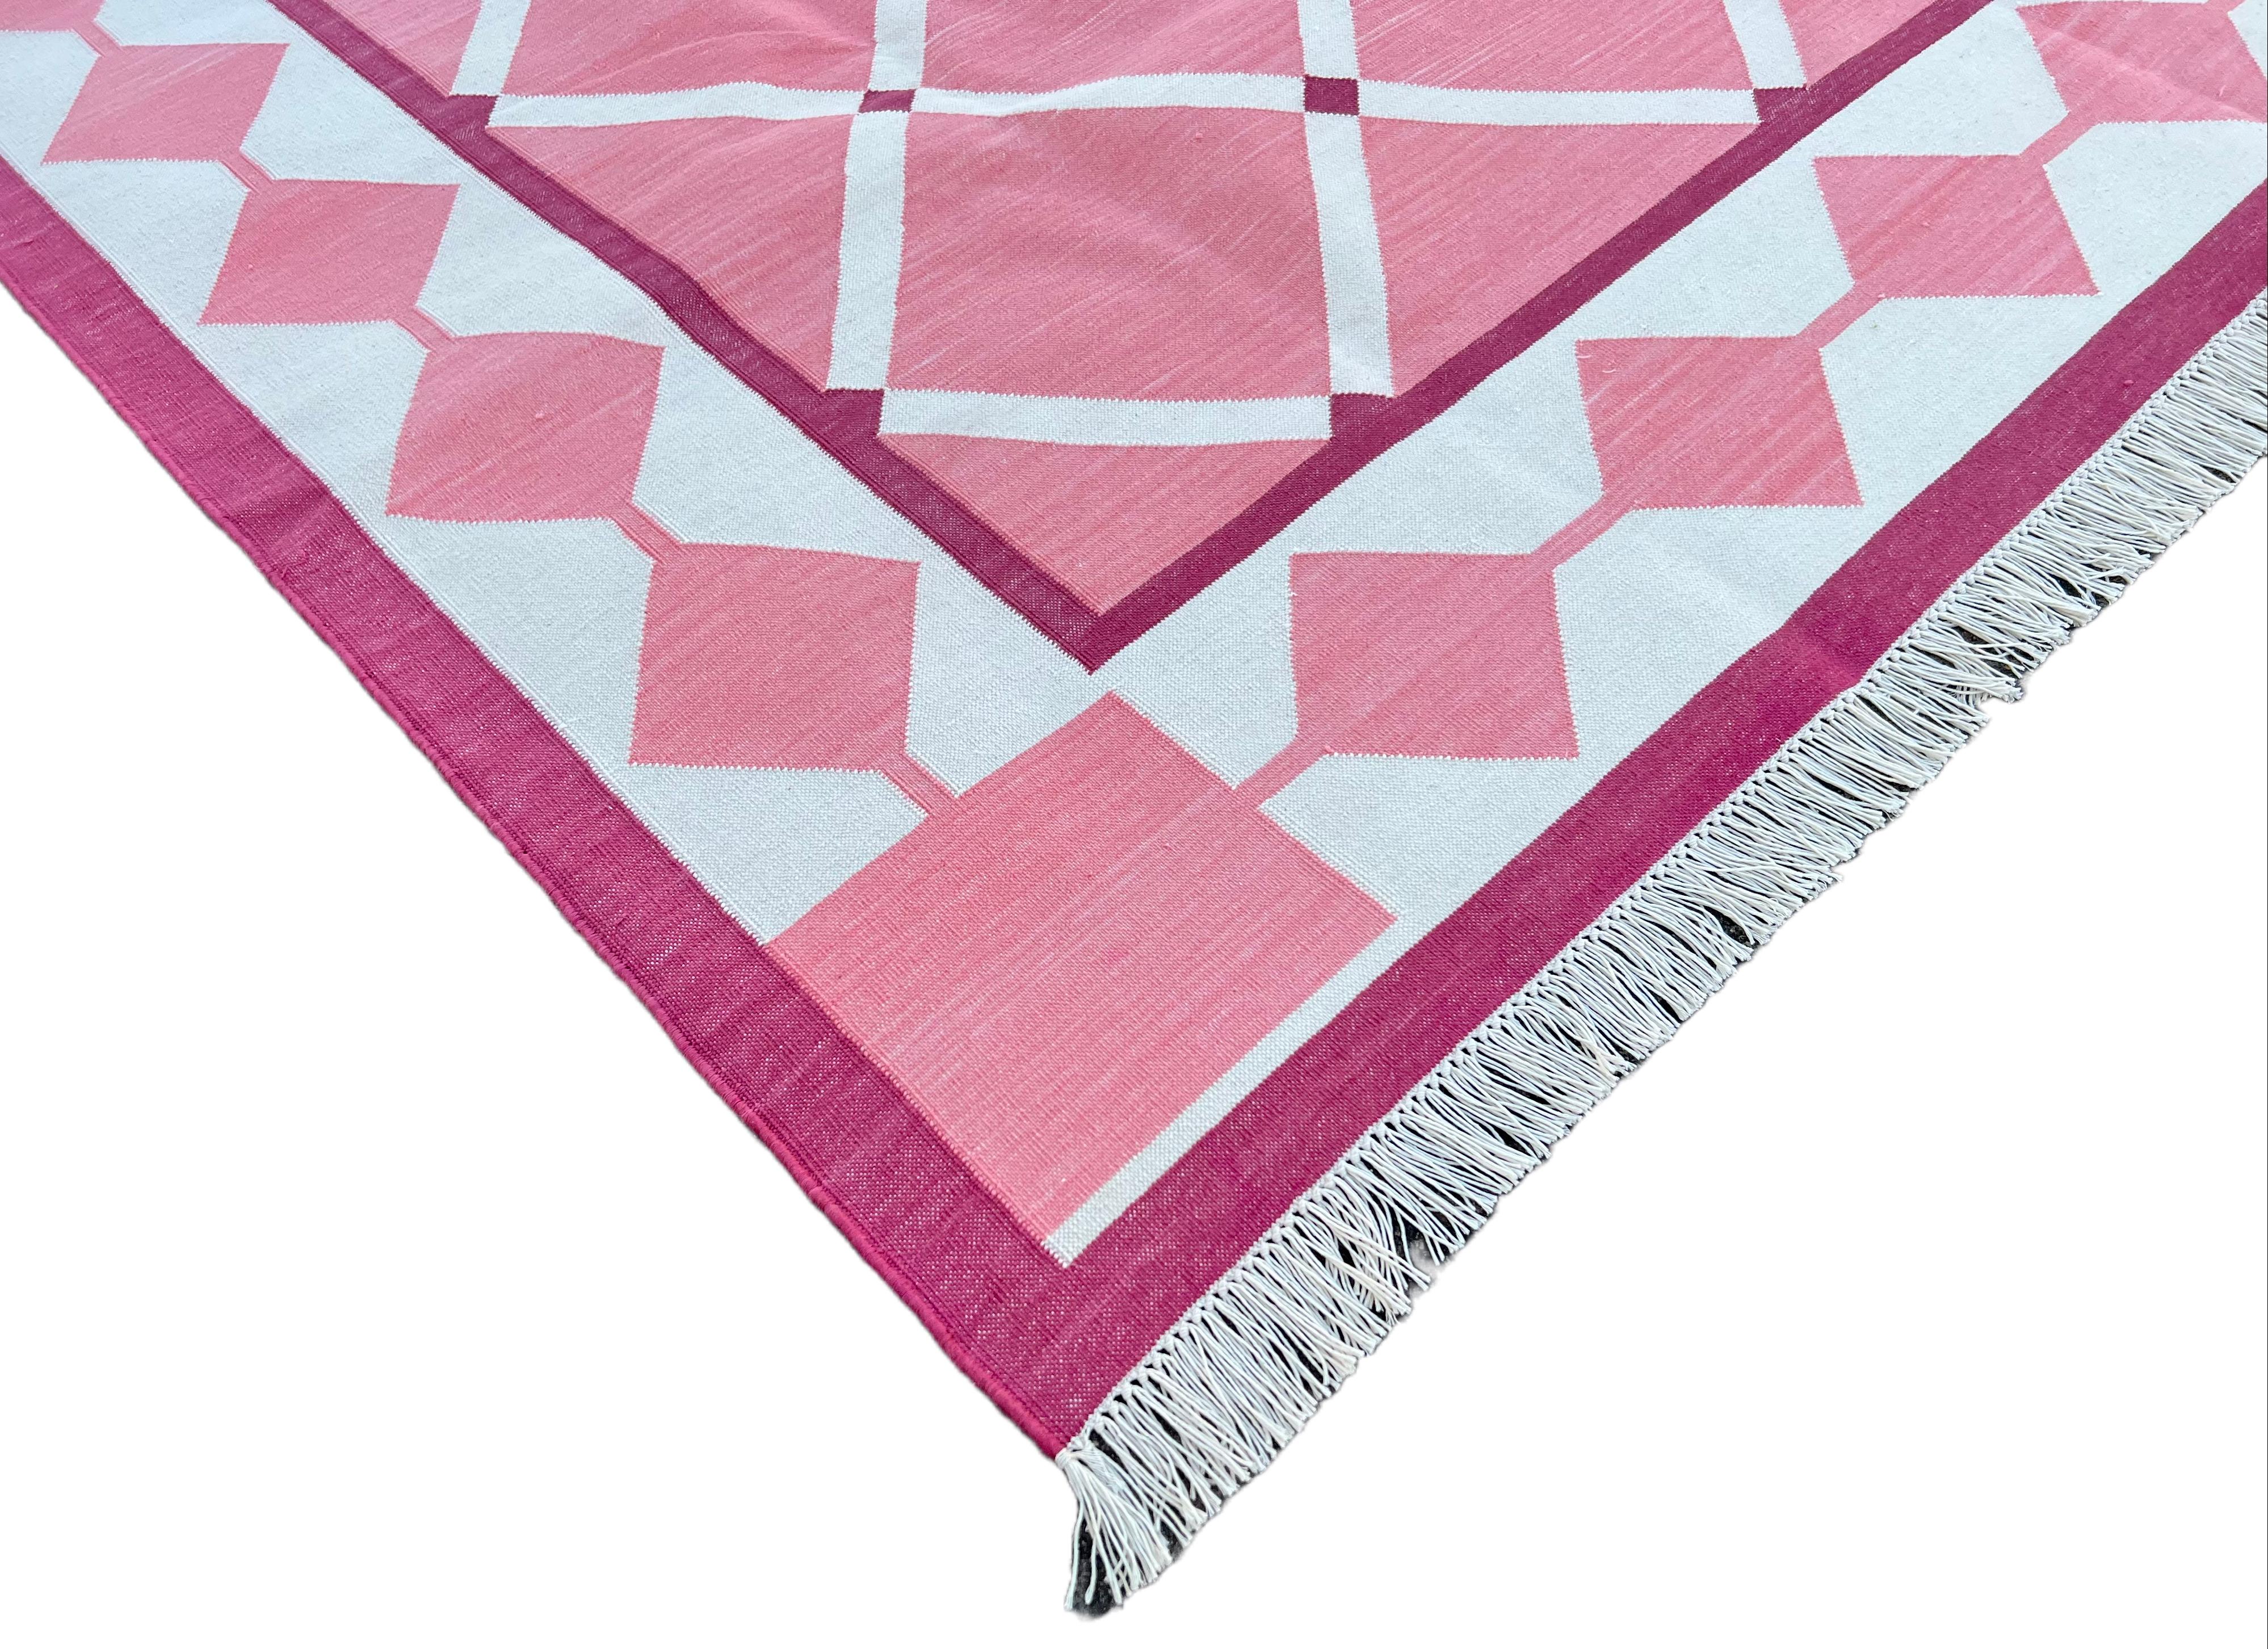 Mid-Century Modern Handmade Cotton Area Flat Weave Rug, 6x9 Pink And White Geometric Indian Dhurrie For Sale